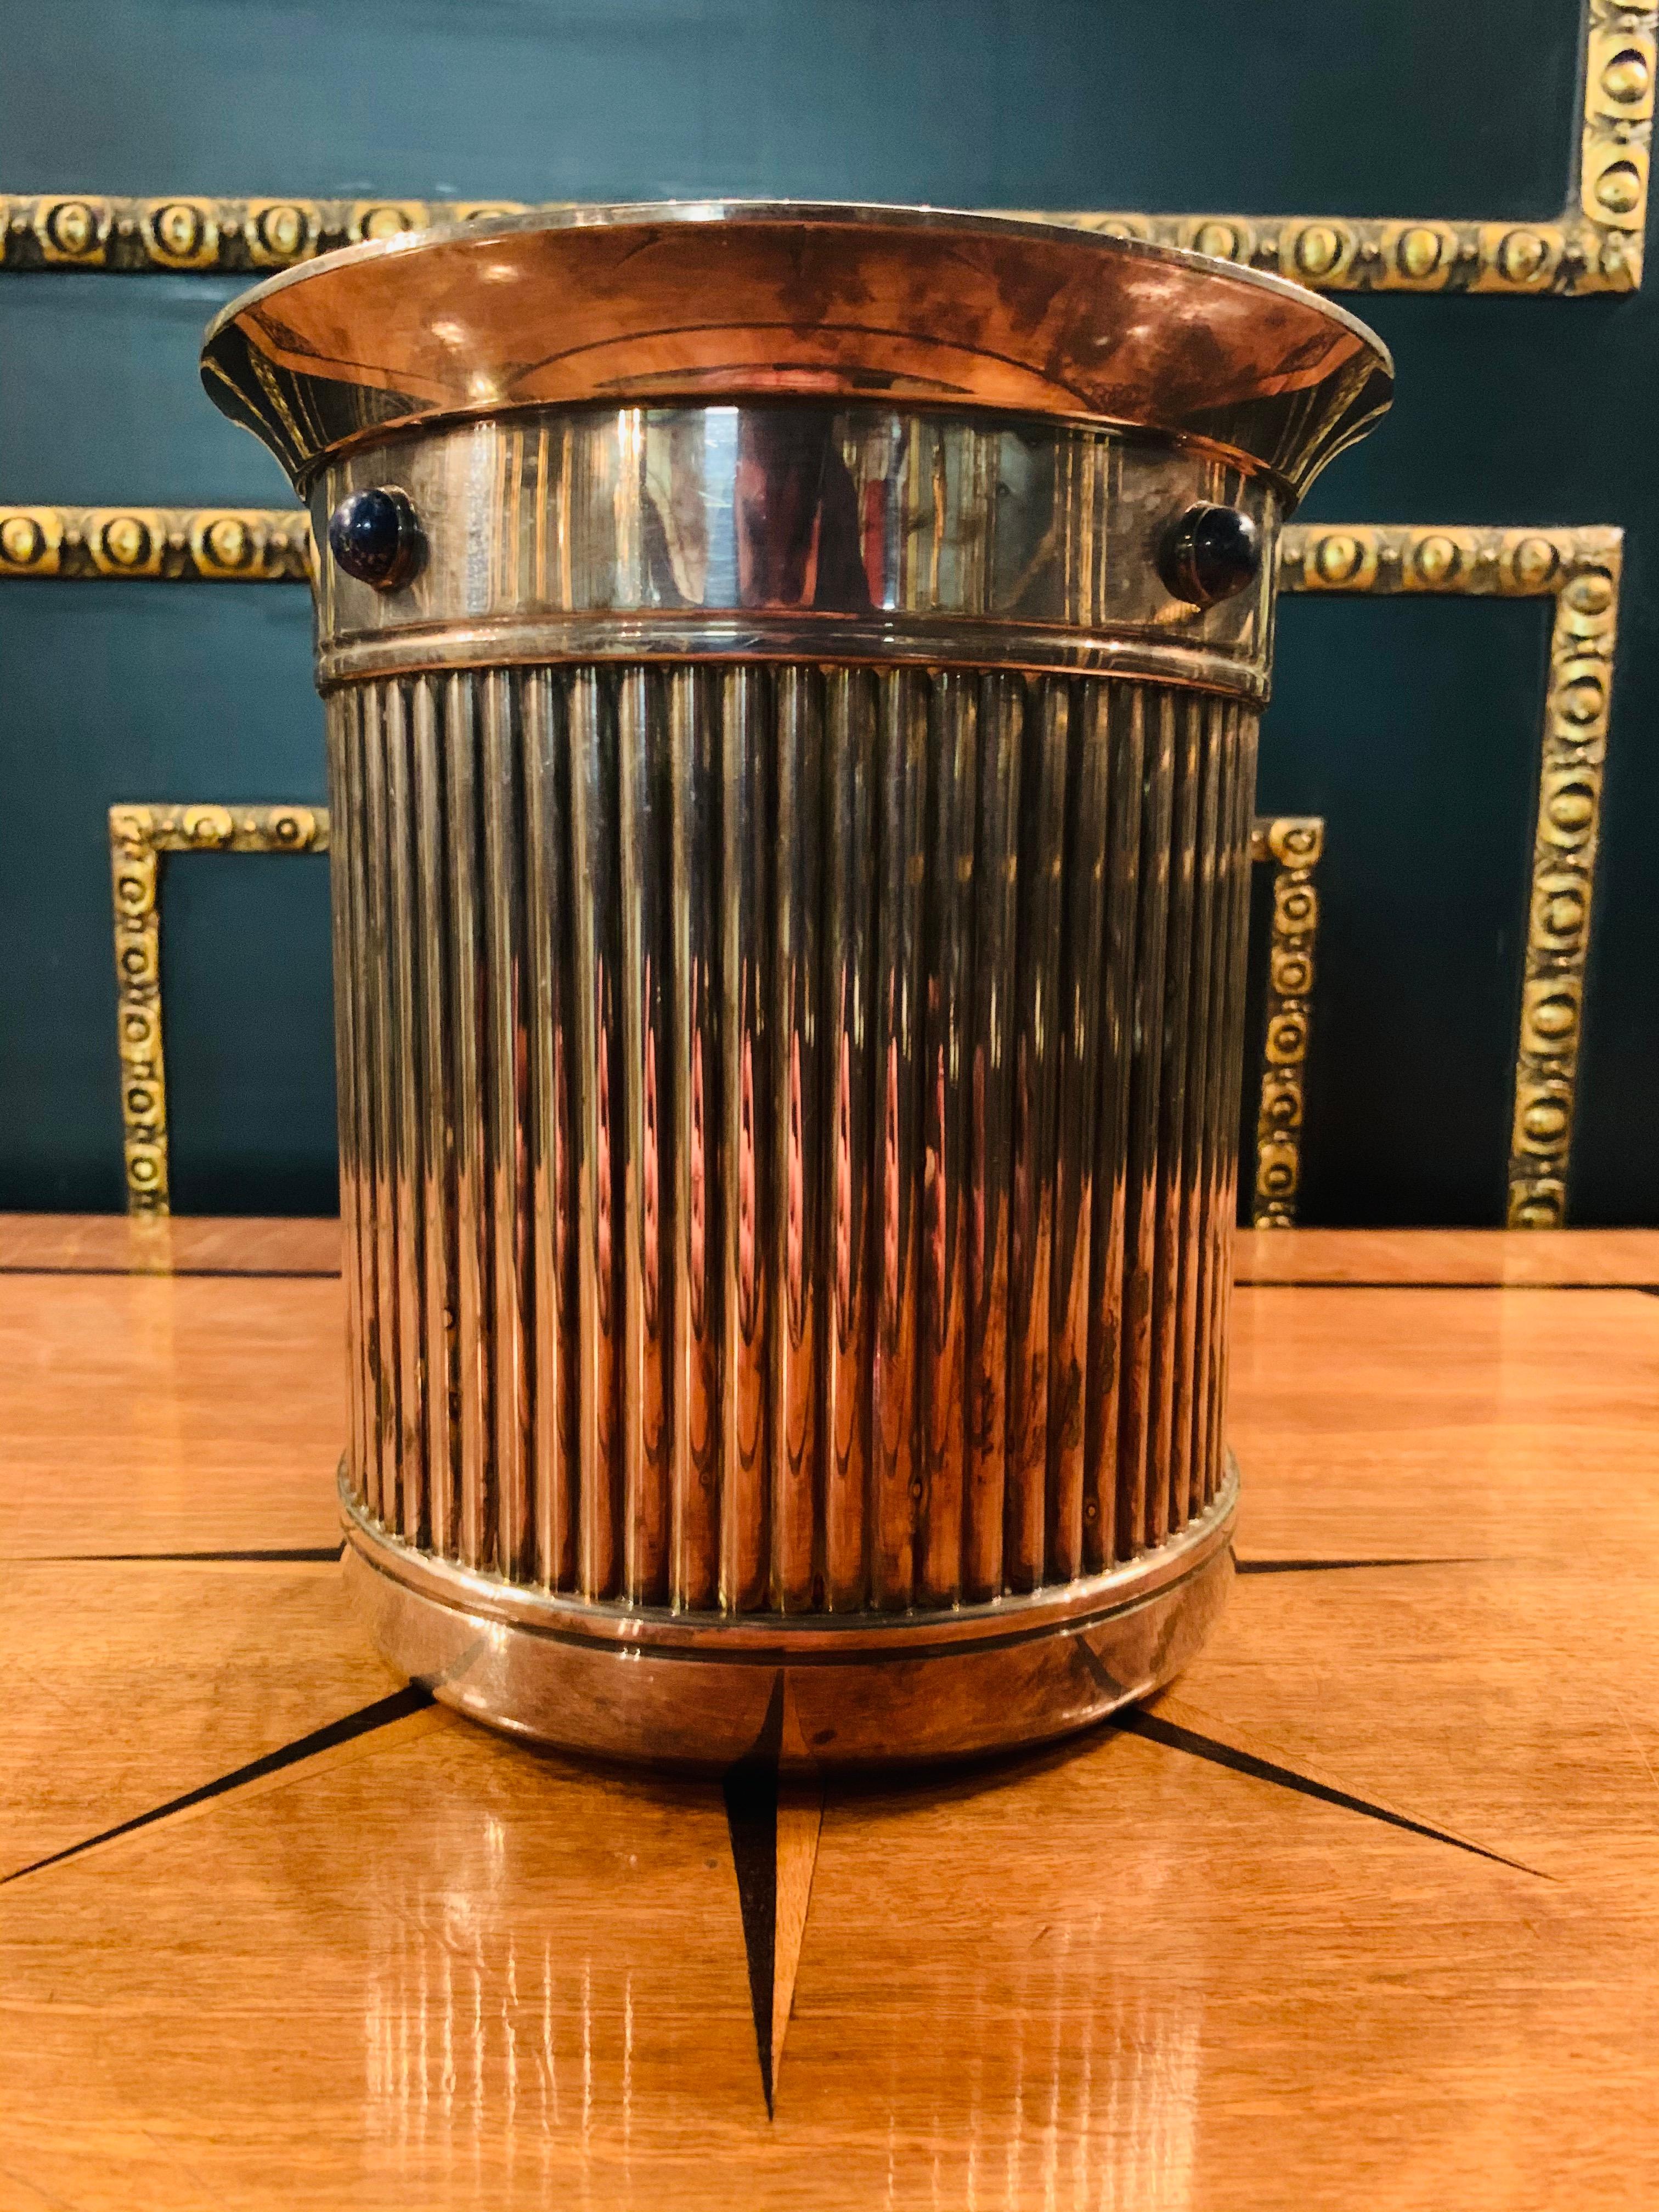 Rarity and nowhere to be found.
Original Cartier ice bucket with insert framed with lapis lazuli stones, silver plated.
Unfortunately one stone is missing.
The ice bucket just needs to be cleaned.


Dimensions:
Height 24 cm
Diameter 22